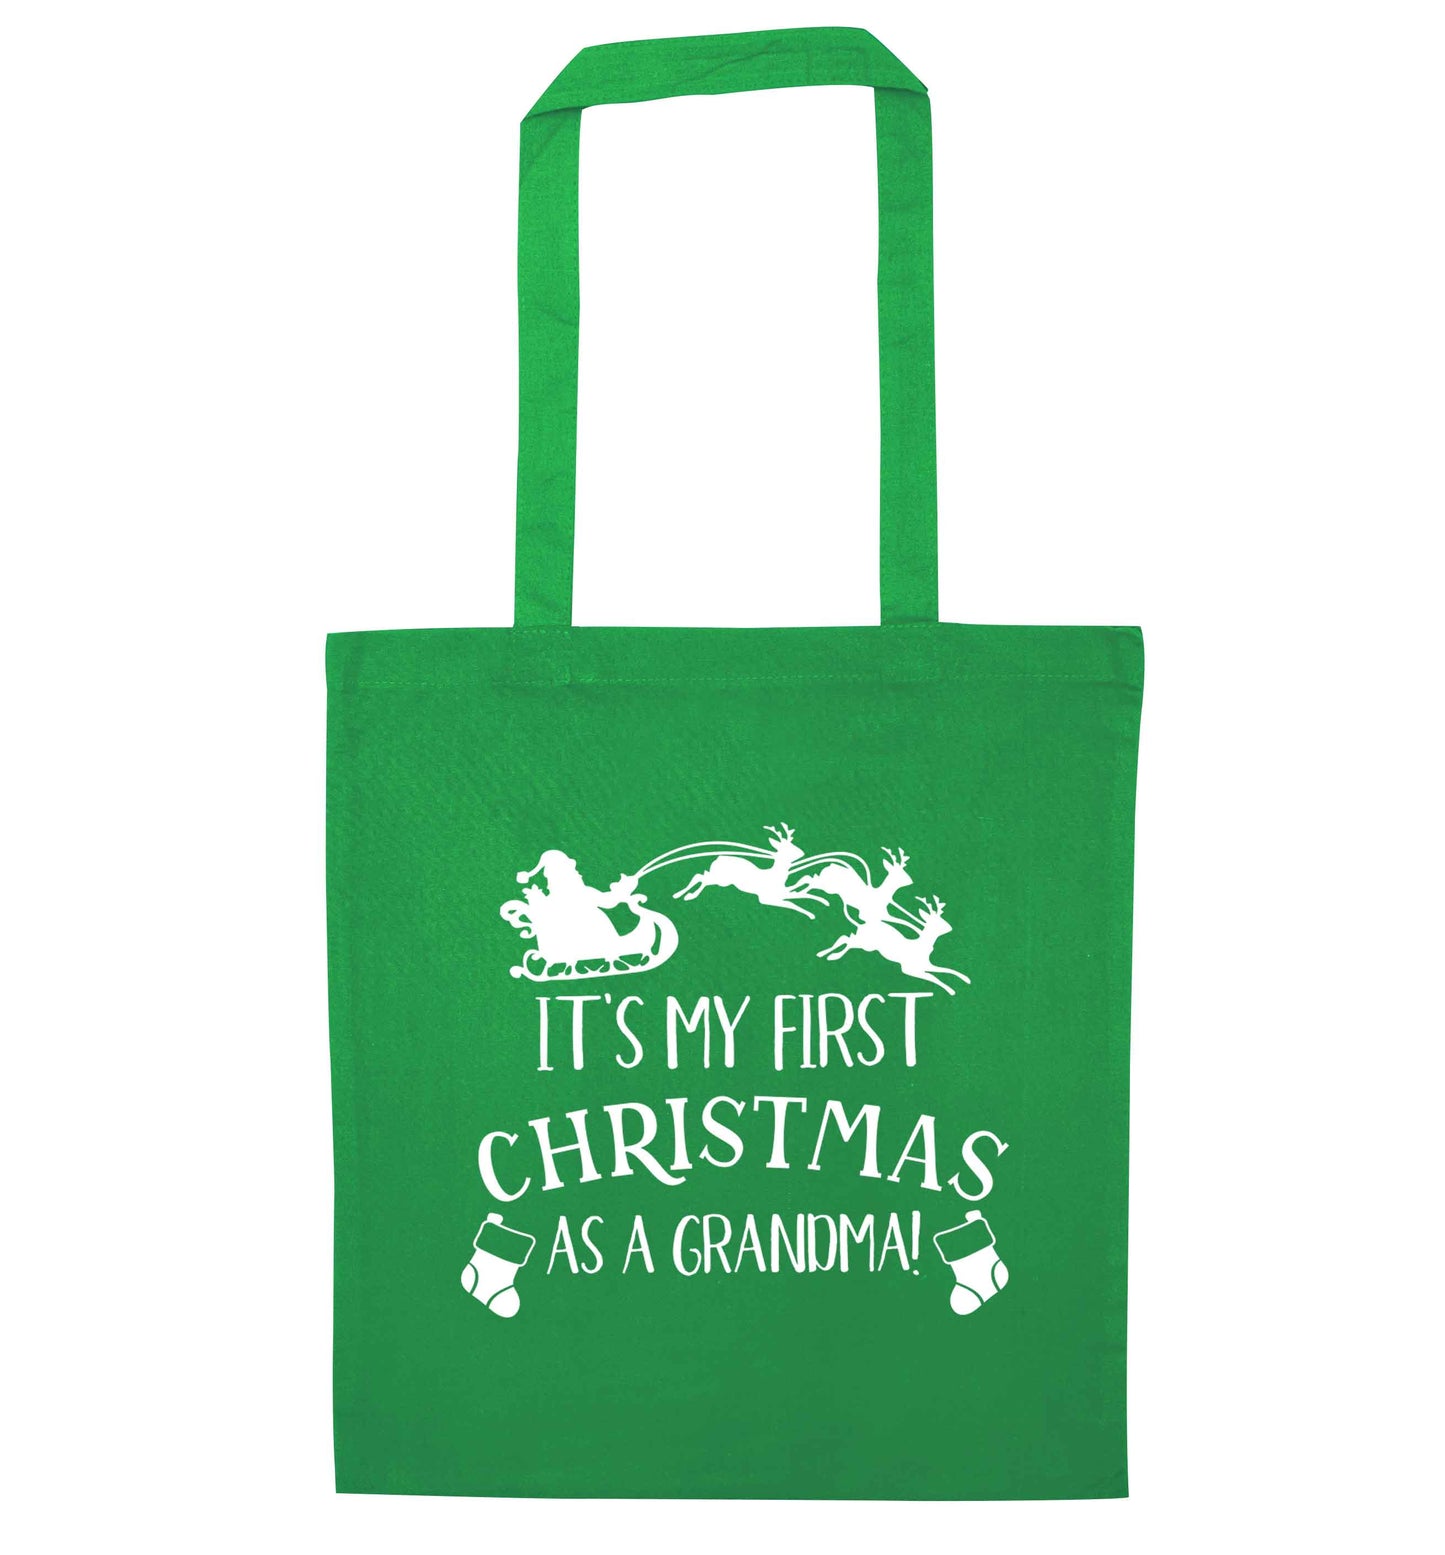 It's my first Christmas as a grandma! green tote bag